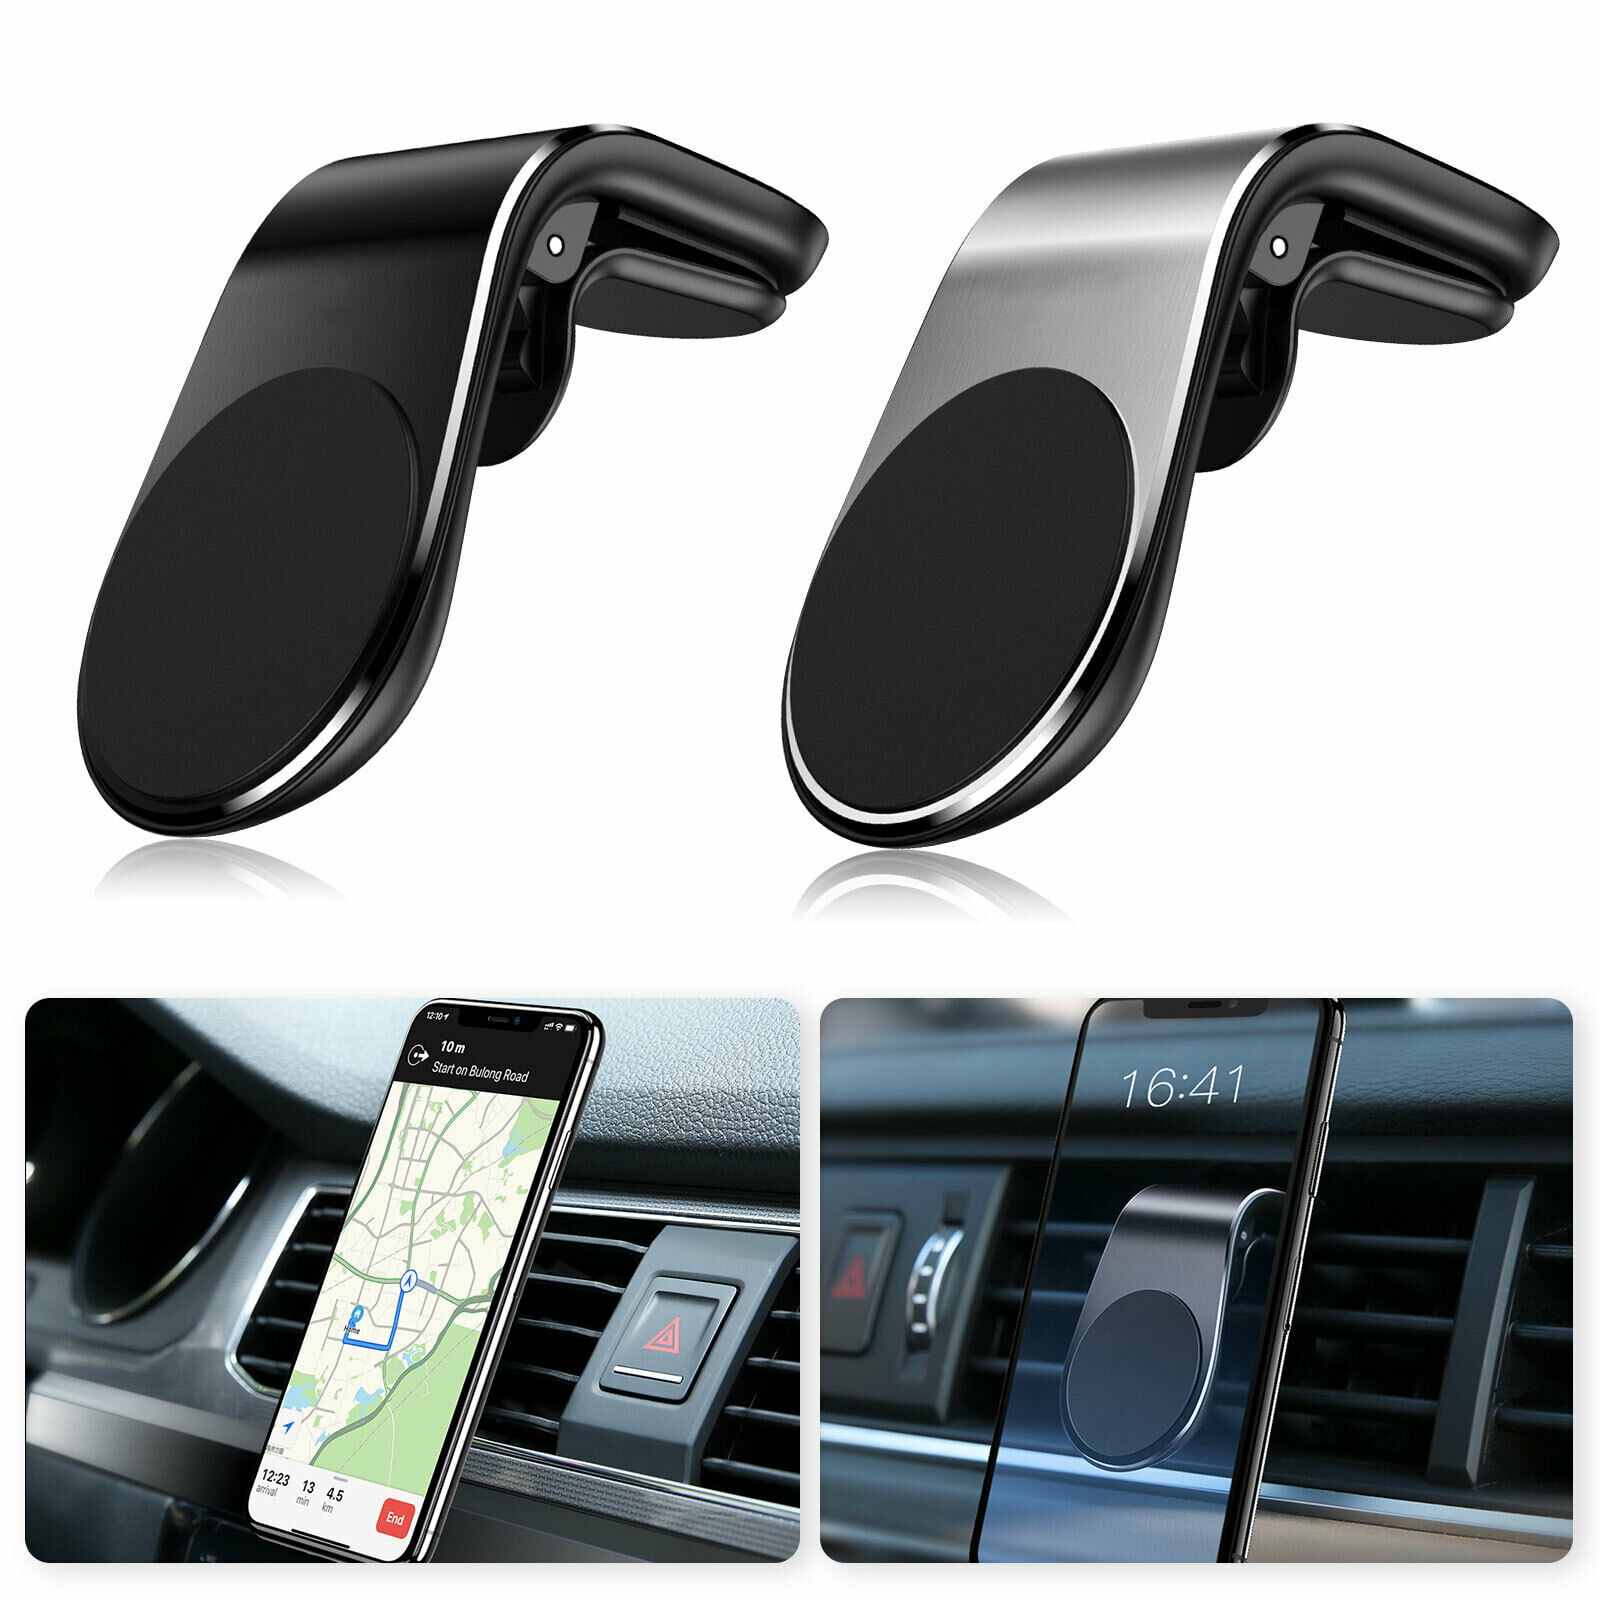 Galaxy Note 9 S10 Plus S9 S8 S7 Universal Auto-Grip Gravity Car Cell Phone Mount Cradle for iPhone 11 XS Max XR XS 8 7 Plus 6s 6 LG Google Pixel and More-Red UrSpeedtekLive Air Vent Phone Holder 